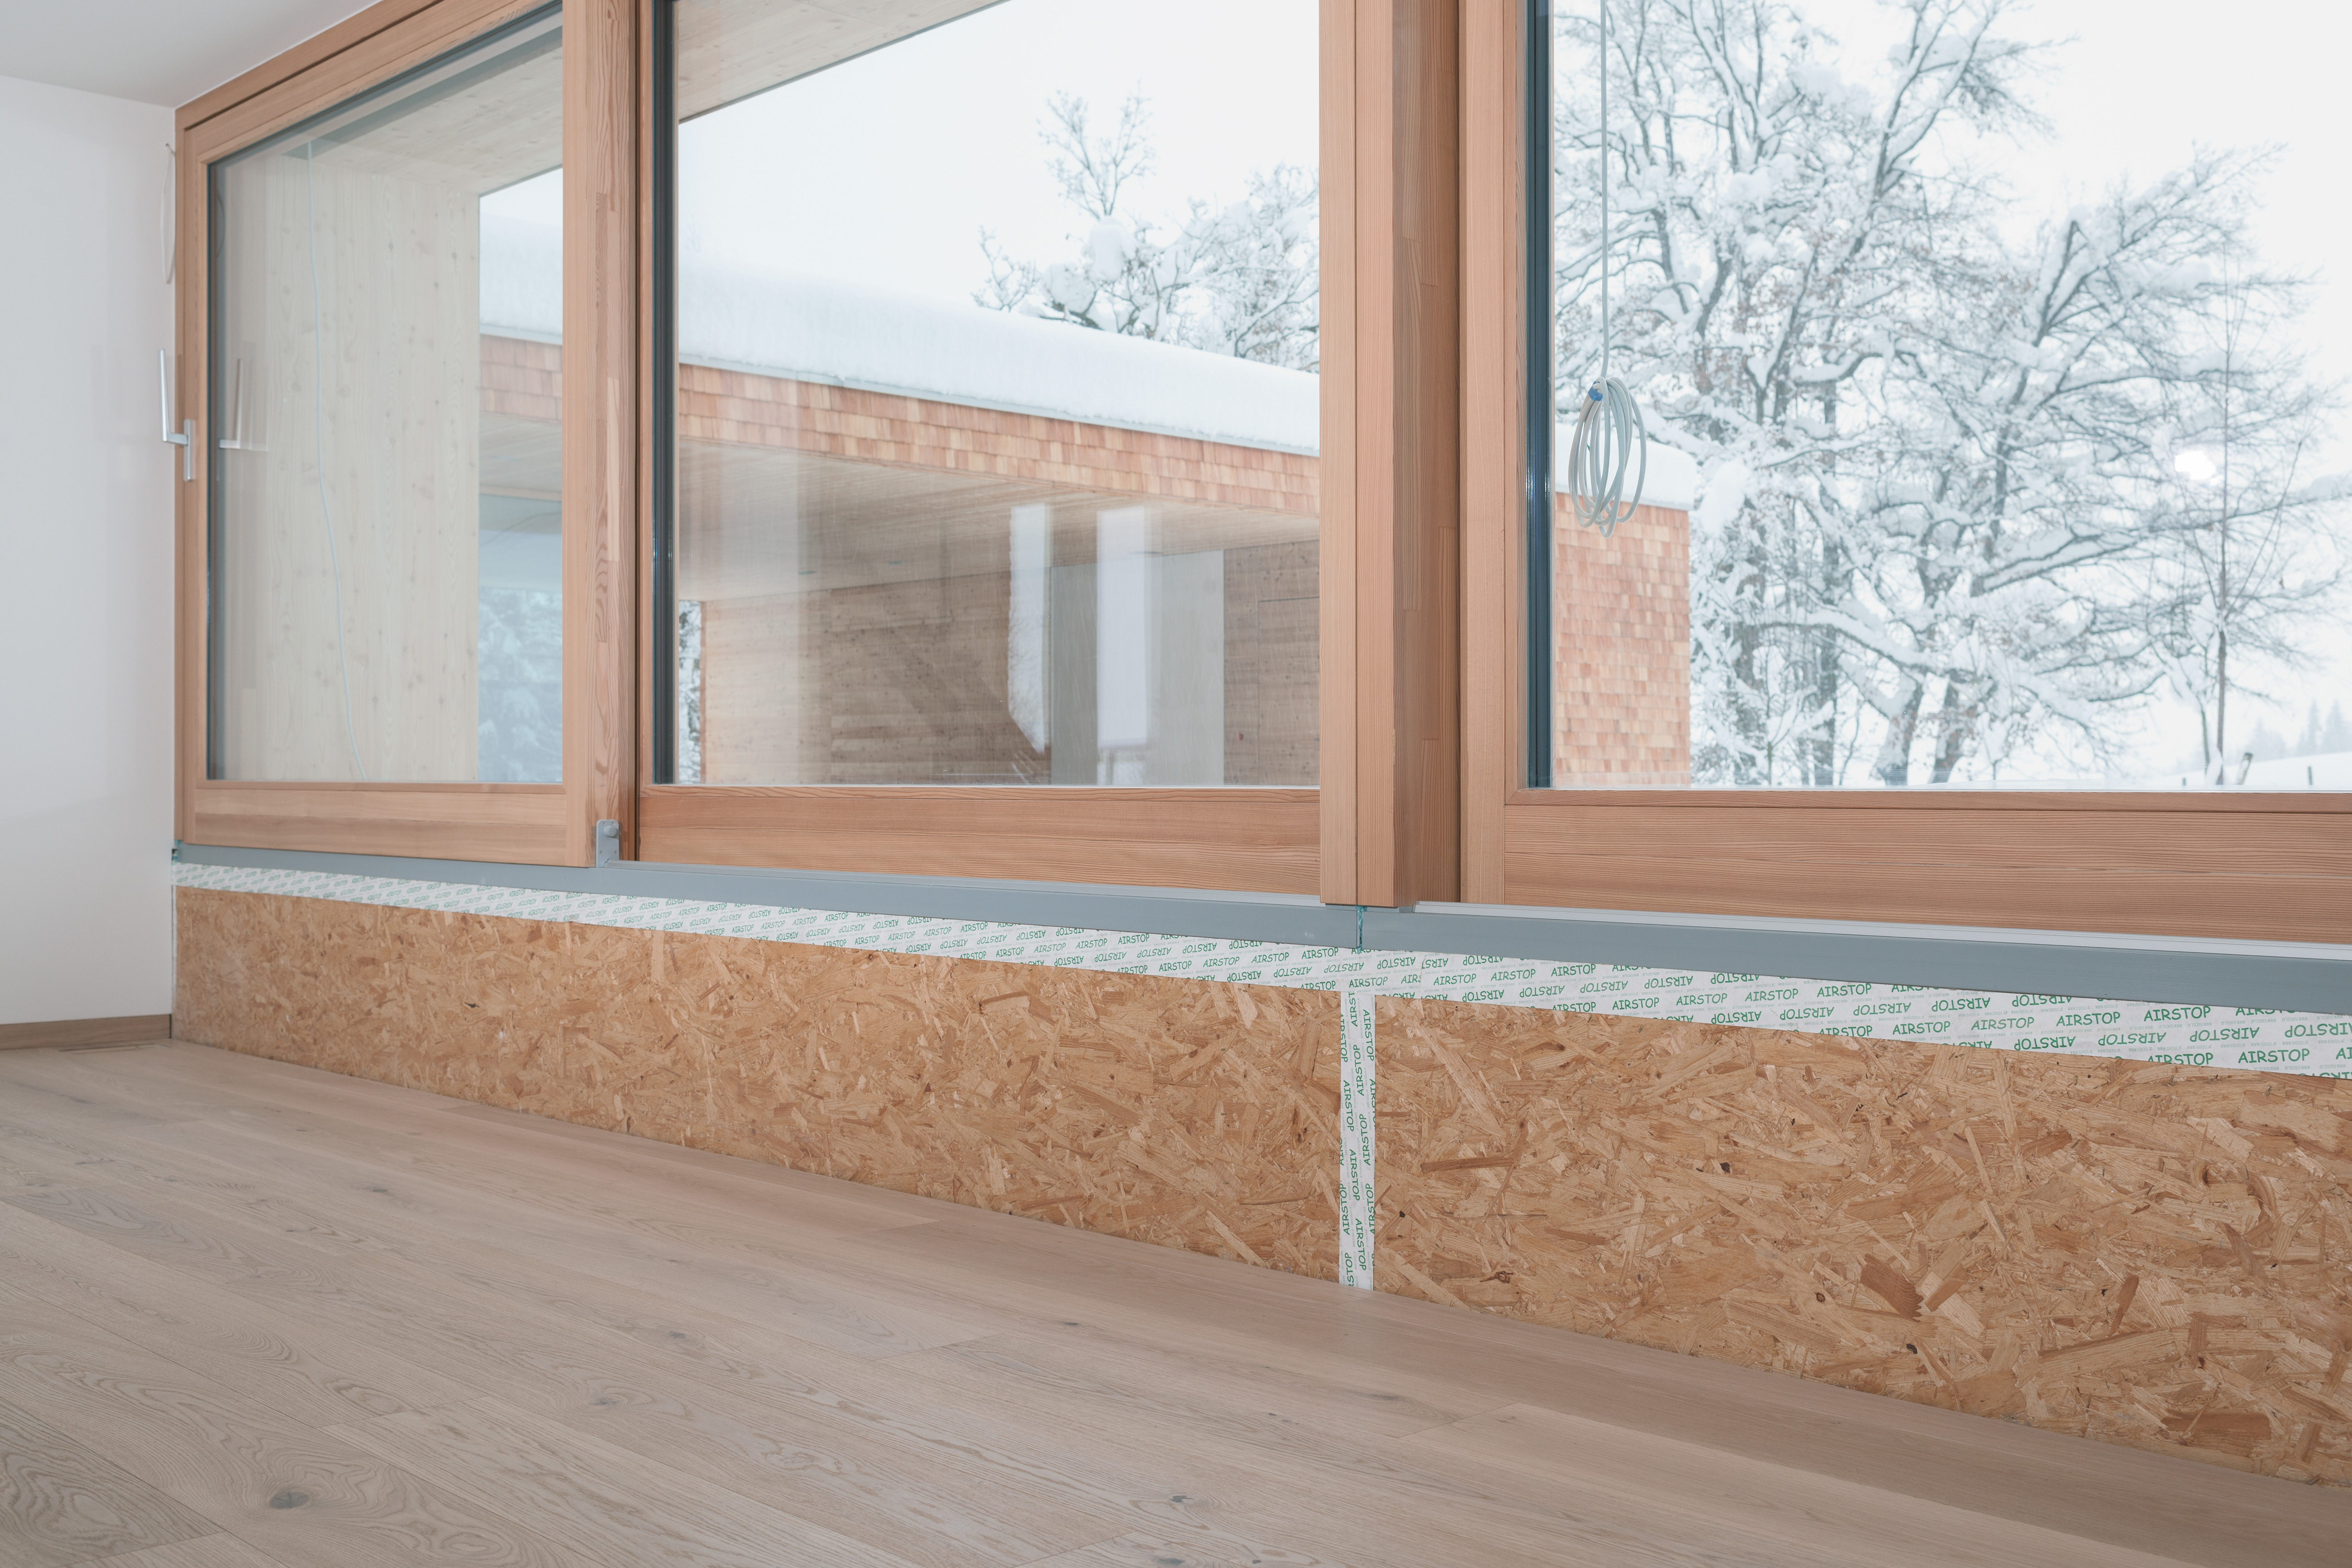 Use of high-performance, sustainable construction boards made from wood